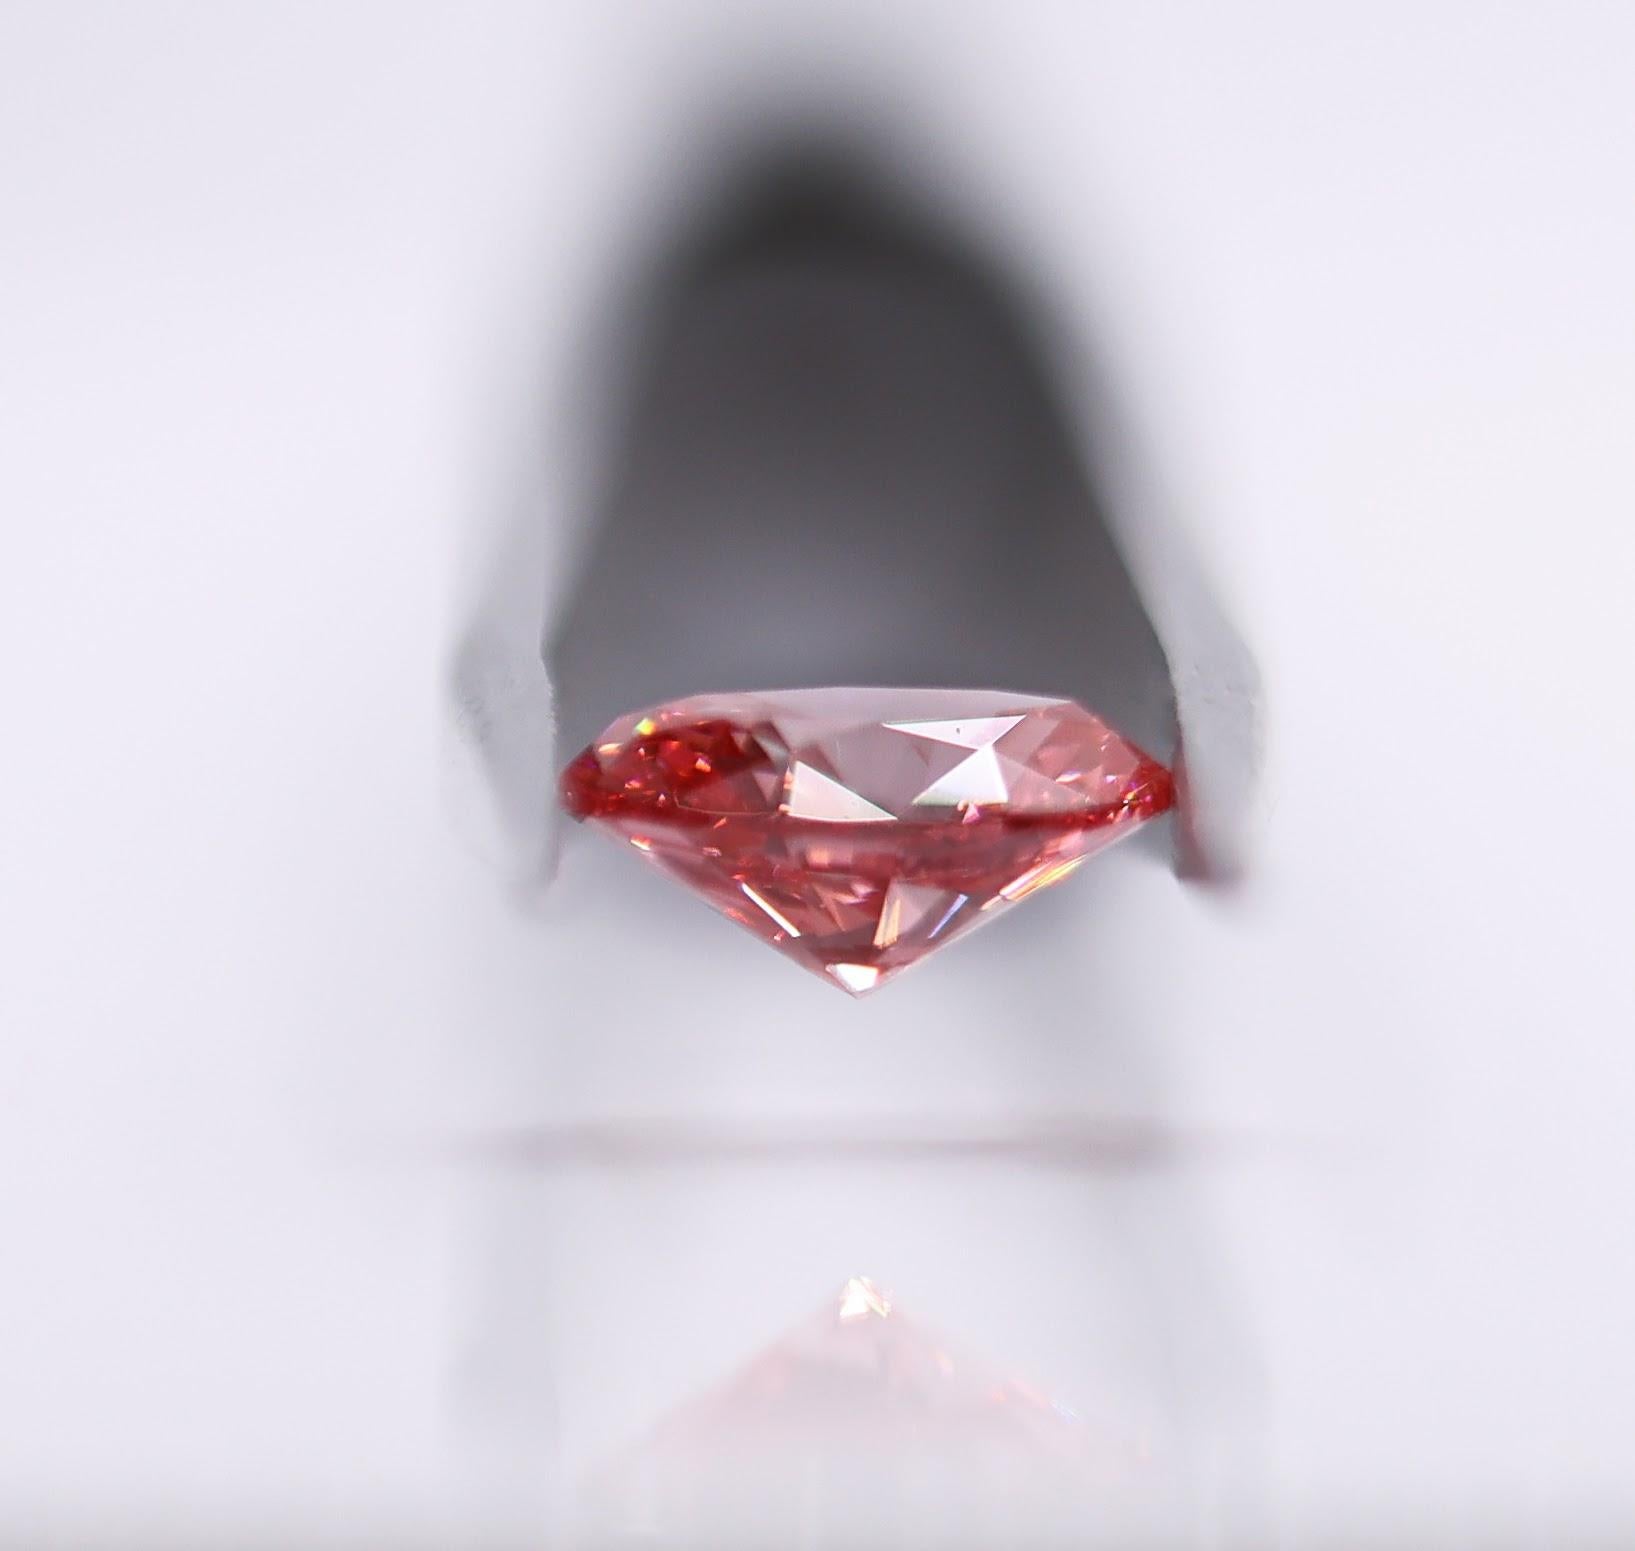 Modernist GIA Certified 1.51 Carat Vivid Earth Mined Pink Diamond Brilliant Oval Cut 8x6mm For Sale